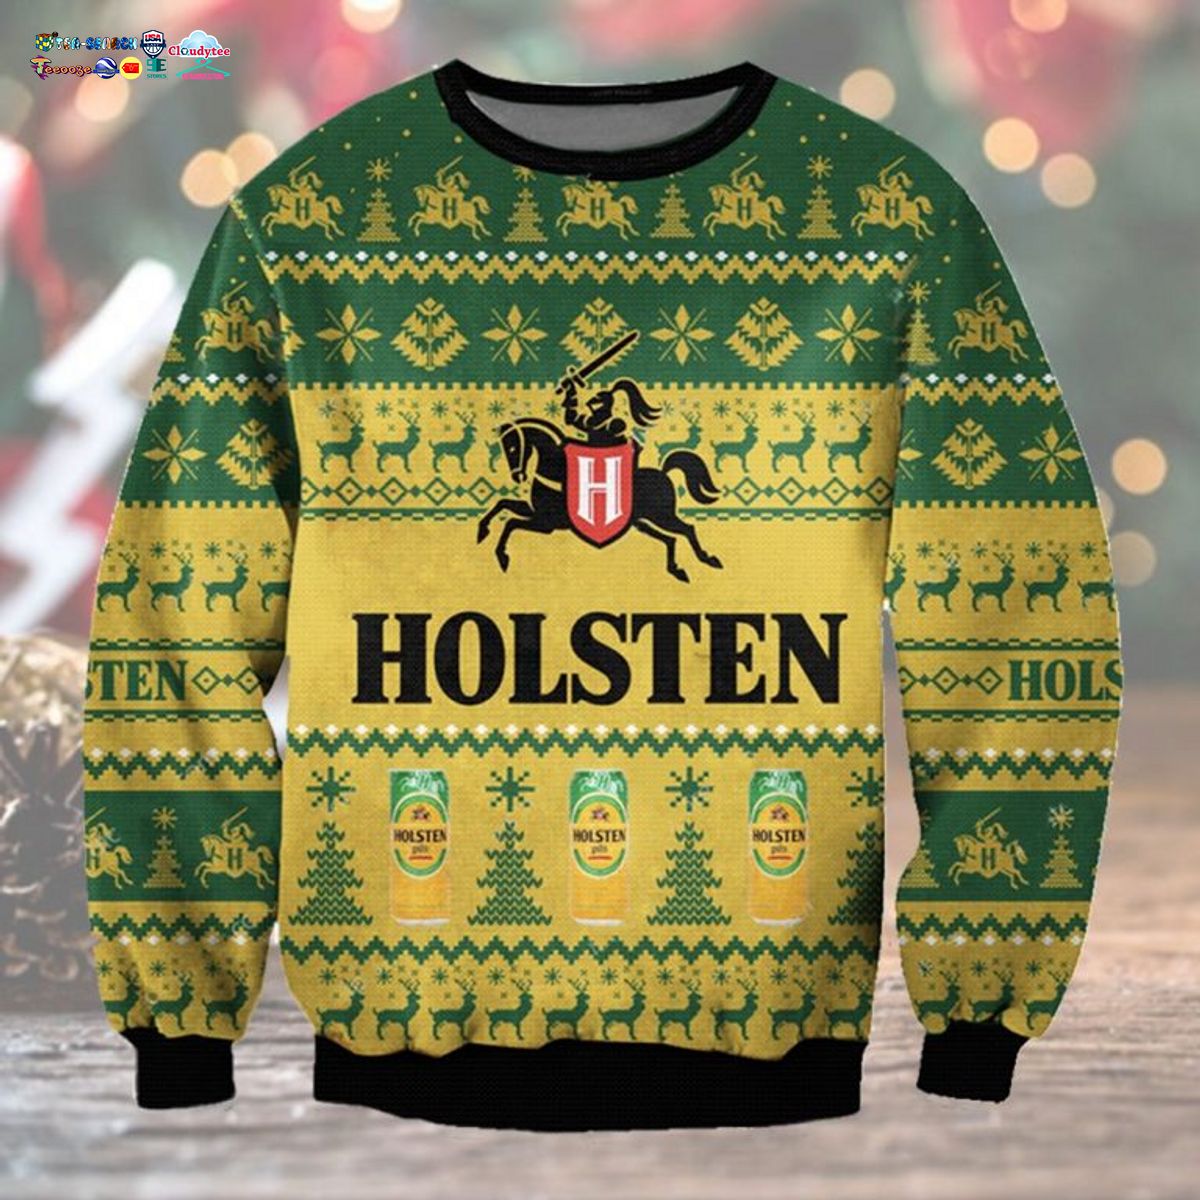 Holsten Ugly Christmas Sweater